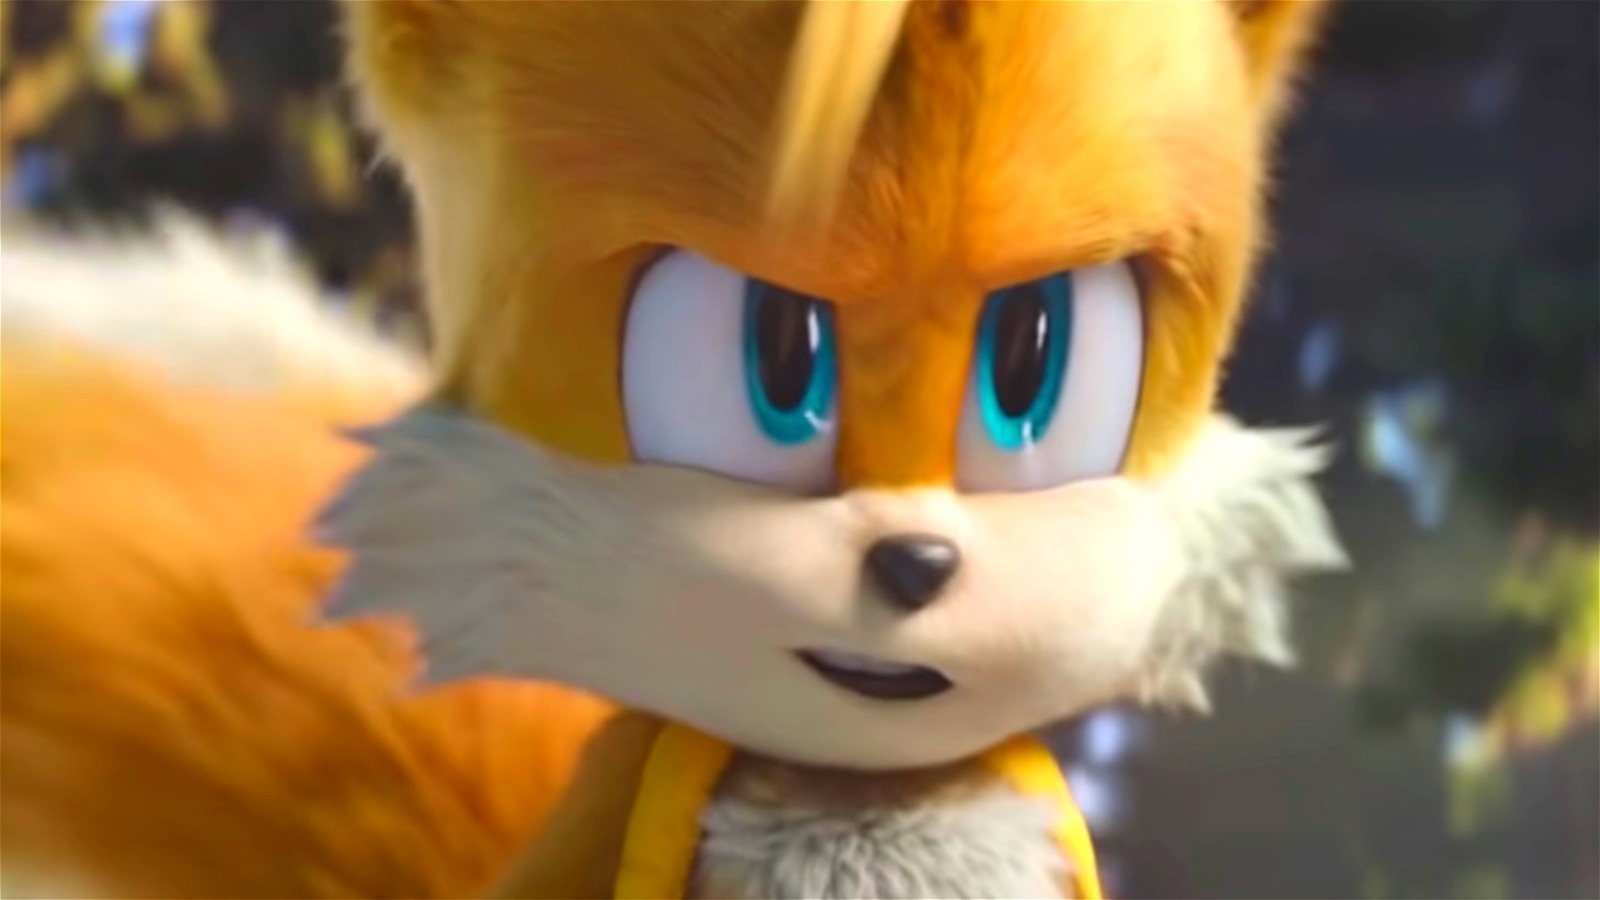 Sonic the Hedgehog 2' Tails Star Says the Sonic Movies Are For Everyone